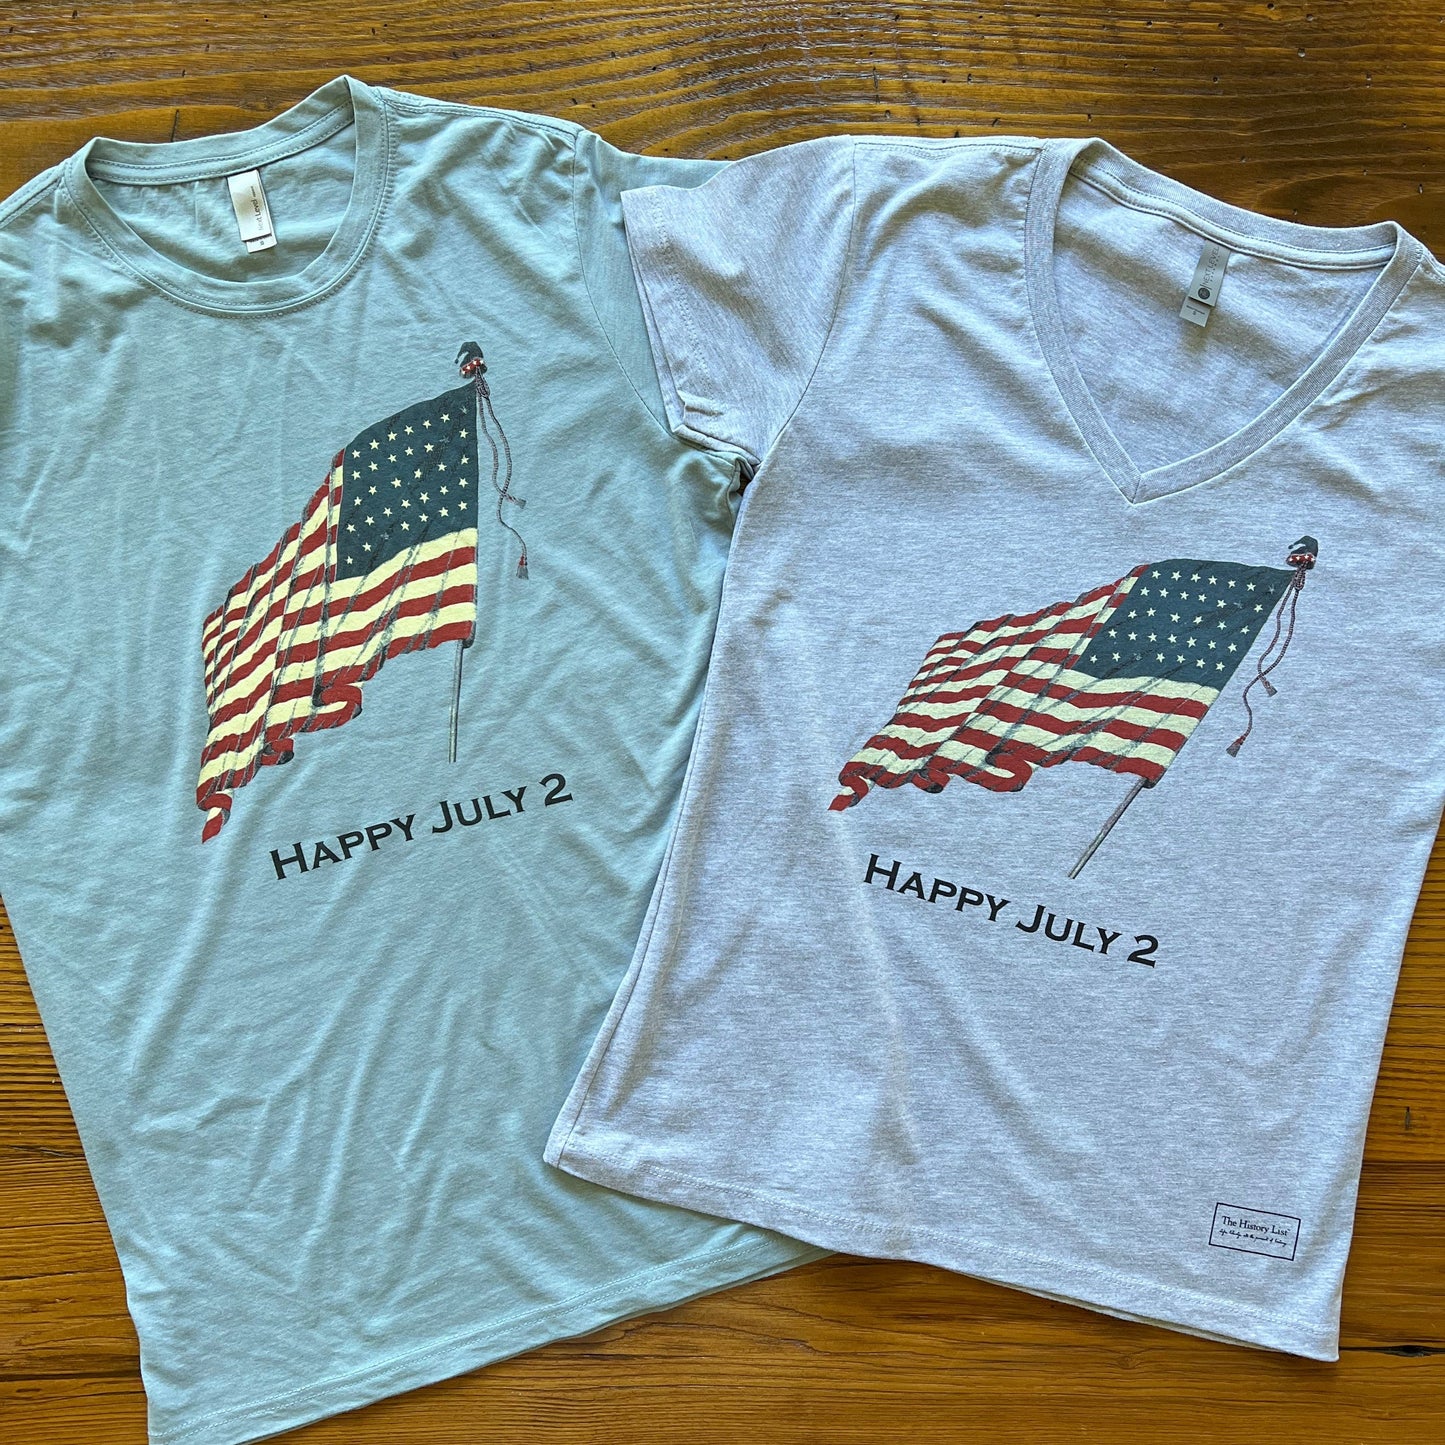 "Happy July 2” v-neck shirt with John Adams and his quote on the back from The History List store